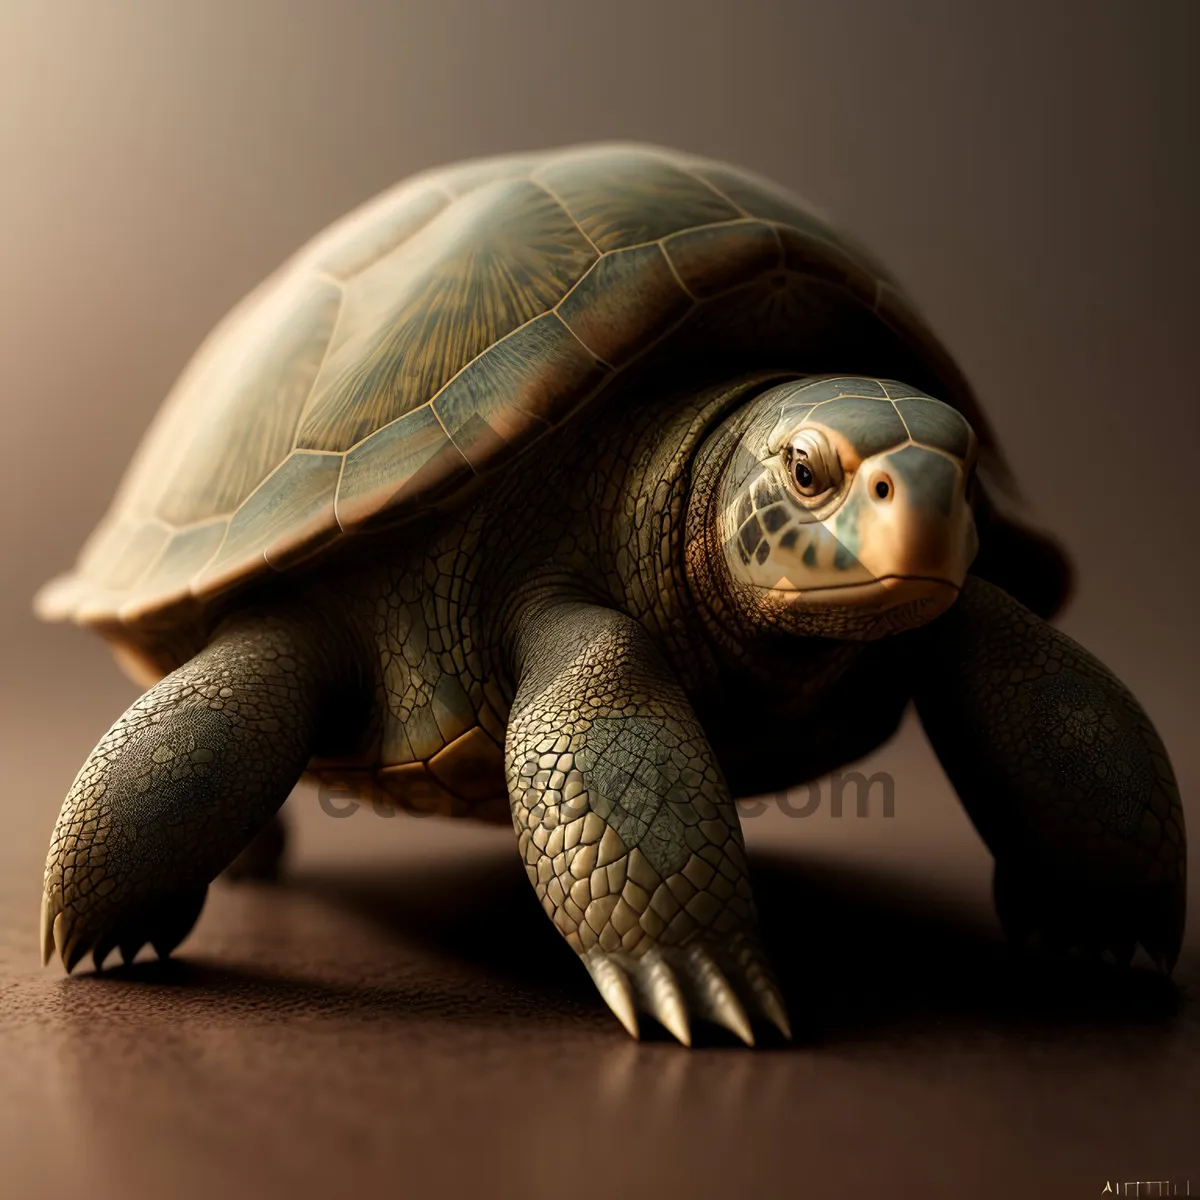 Picture of Slow & Steady: Marvelous Reptile in Its Protective Shell